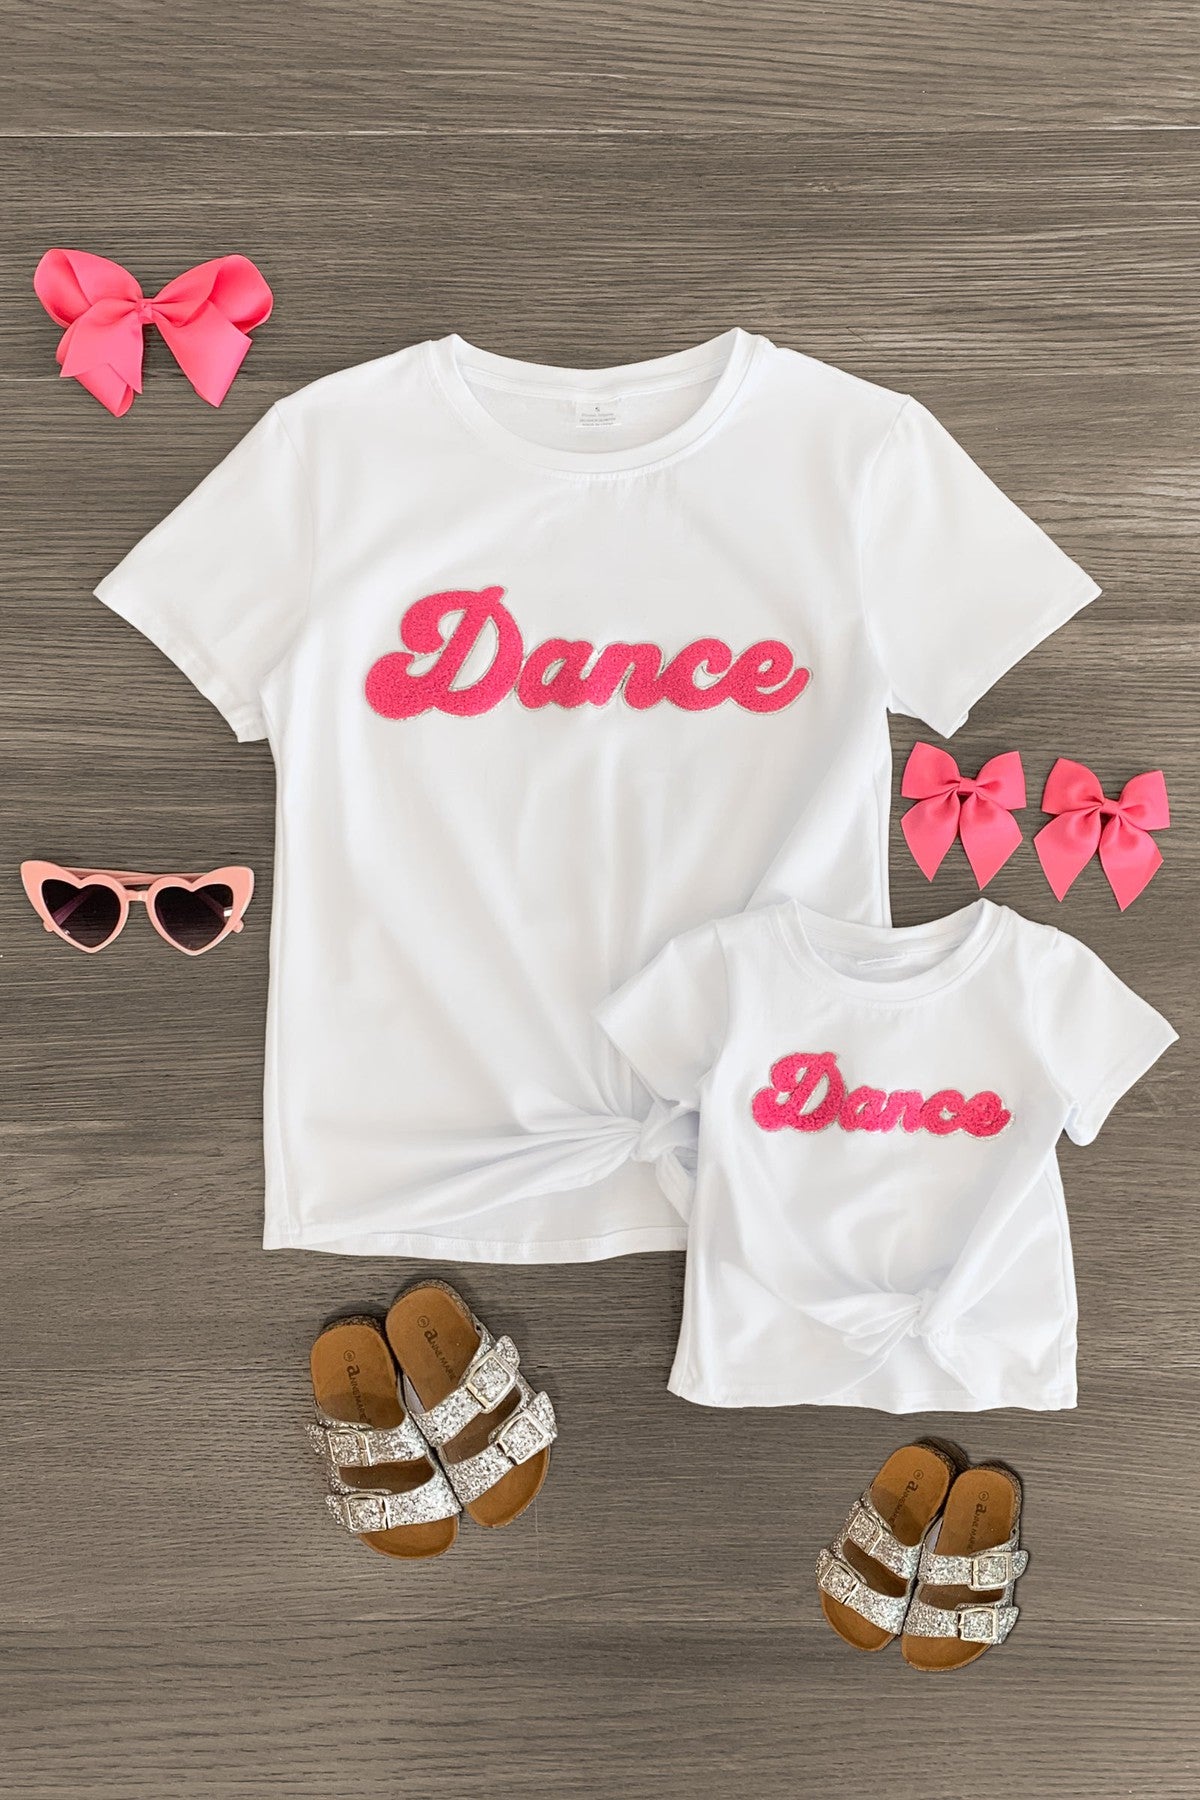 Mom & Me - "Dance" Chenille Patch Short Sleeve Top - Sparkle in Pink